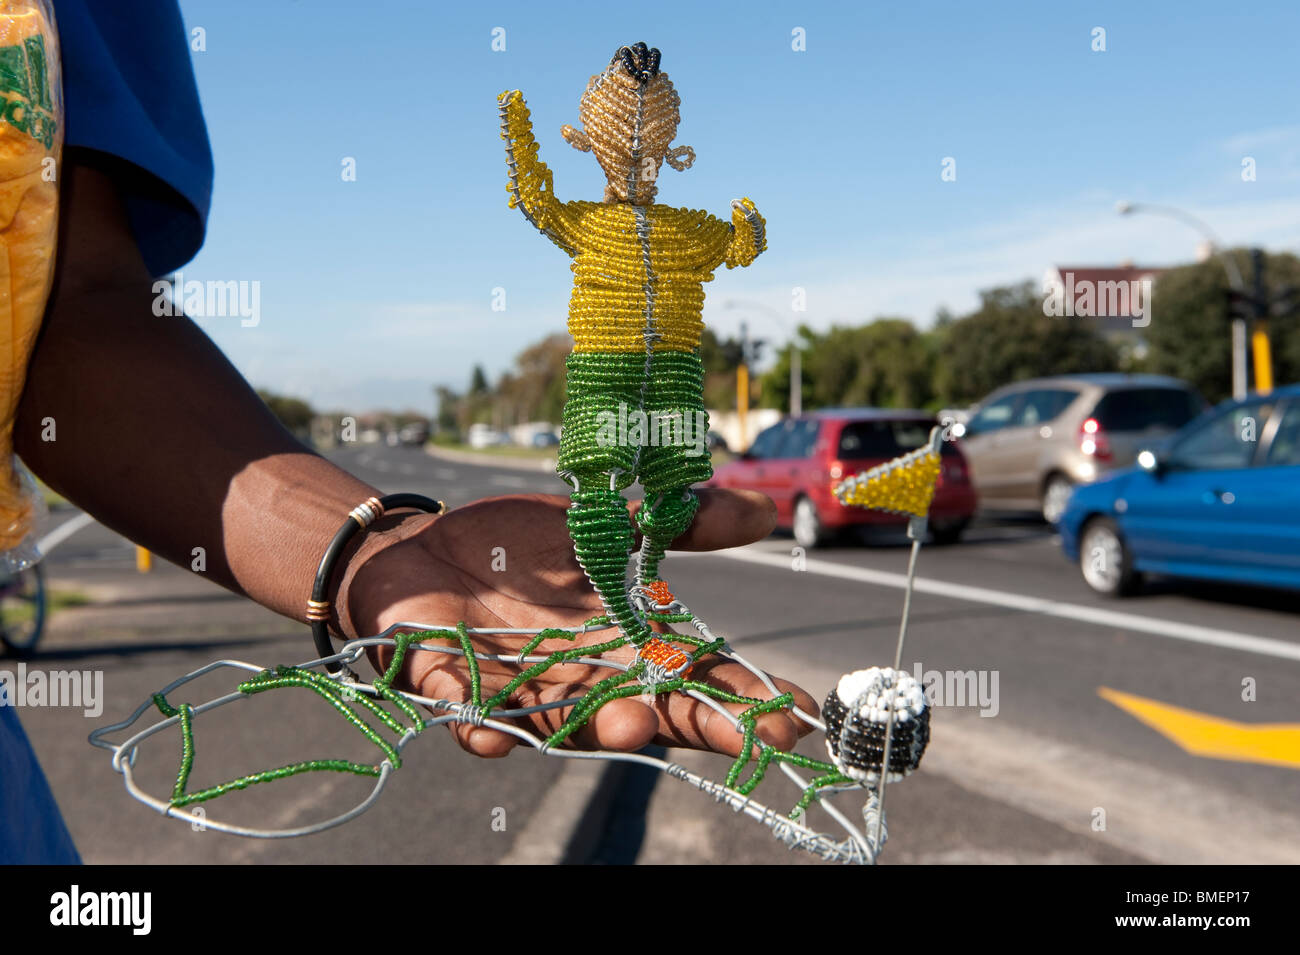 Street vendor sells a handcrafted football player statue made from wire and glass beads, Cape Town, South Africa Stock Photo